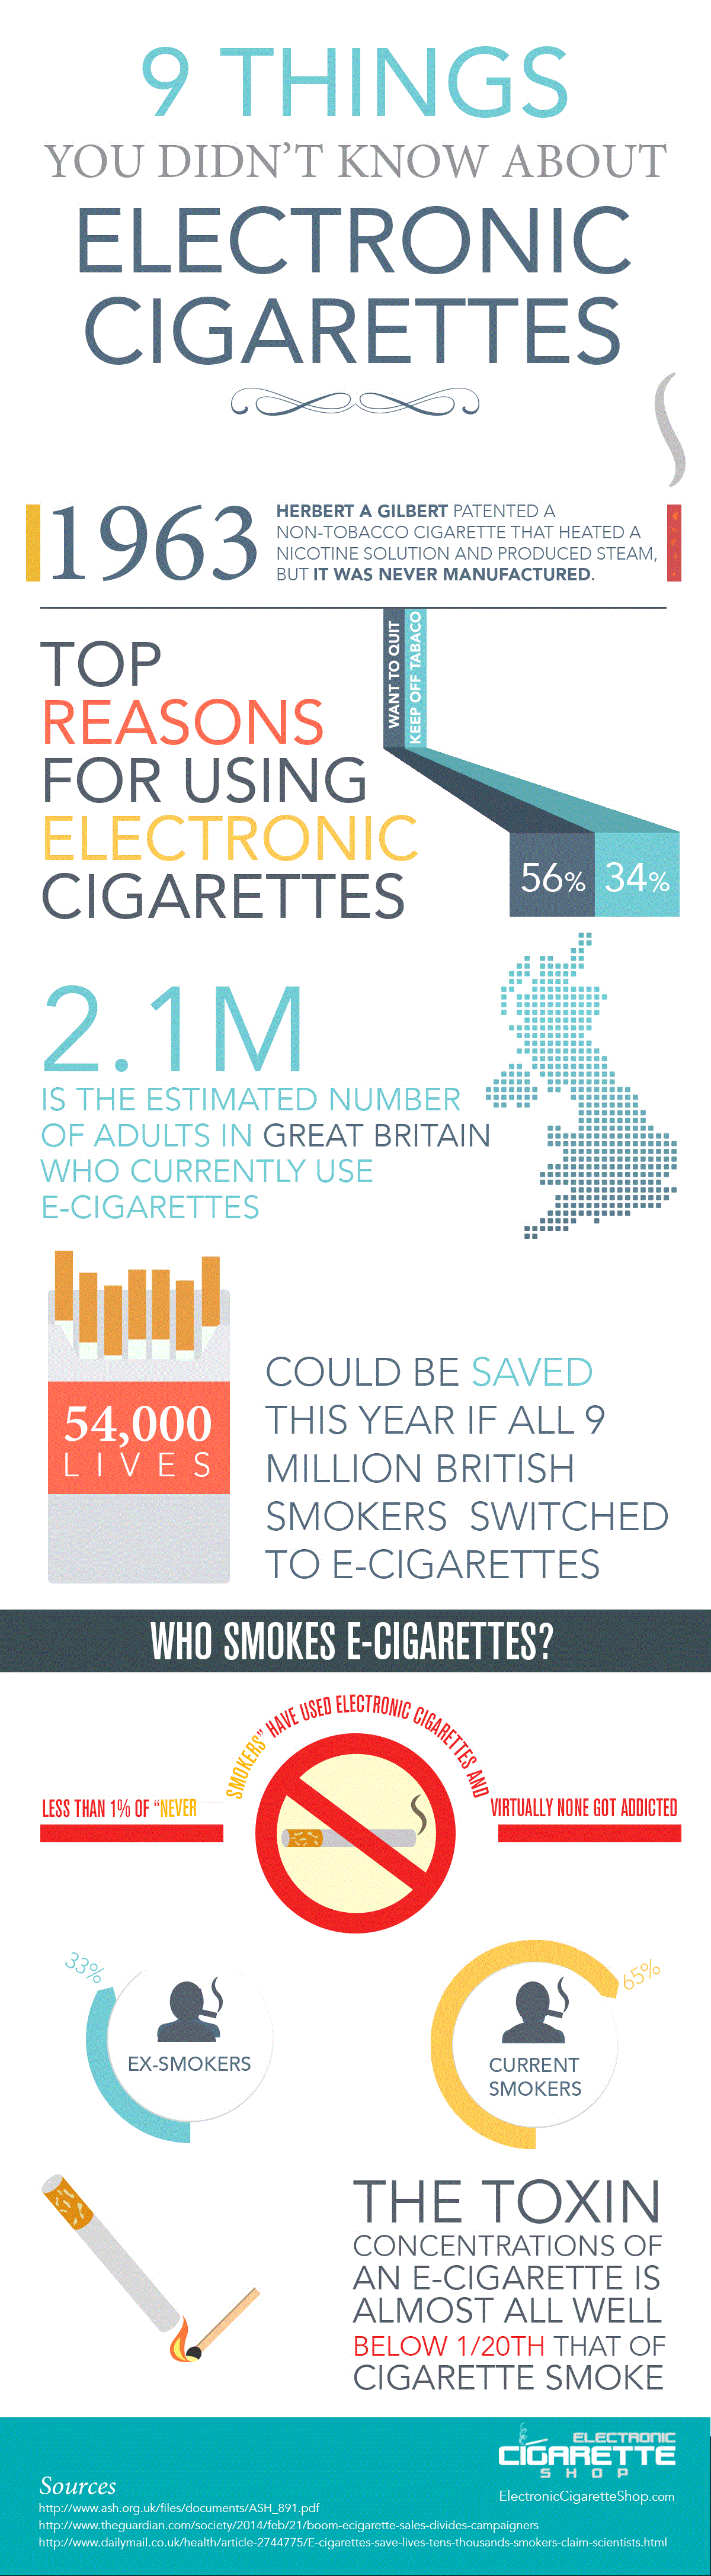 9 things you didn't know about electronic cigarettes Infographic